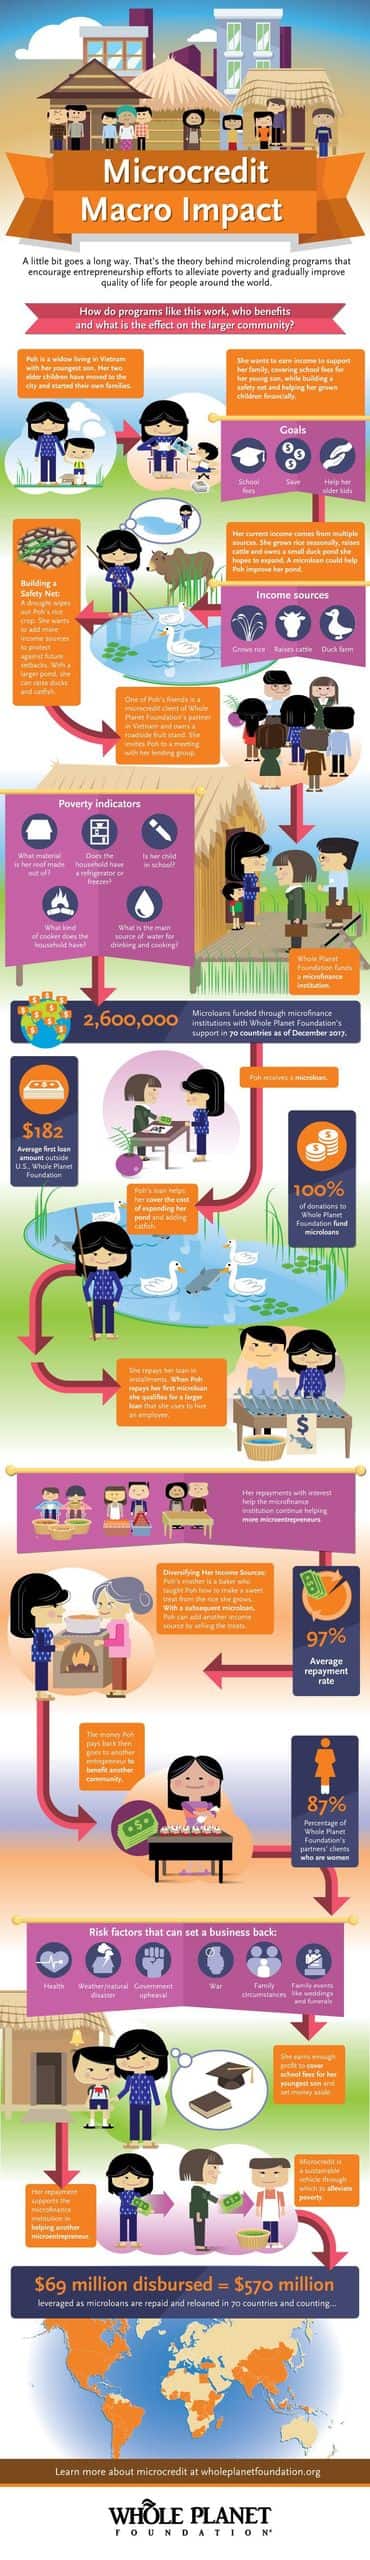 how microcredit works infographic